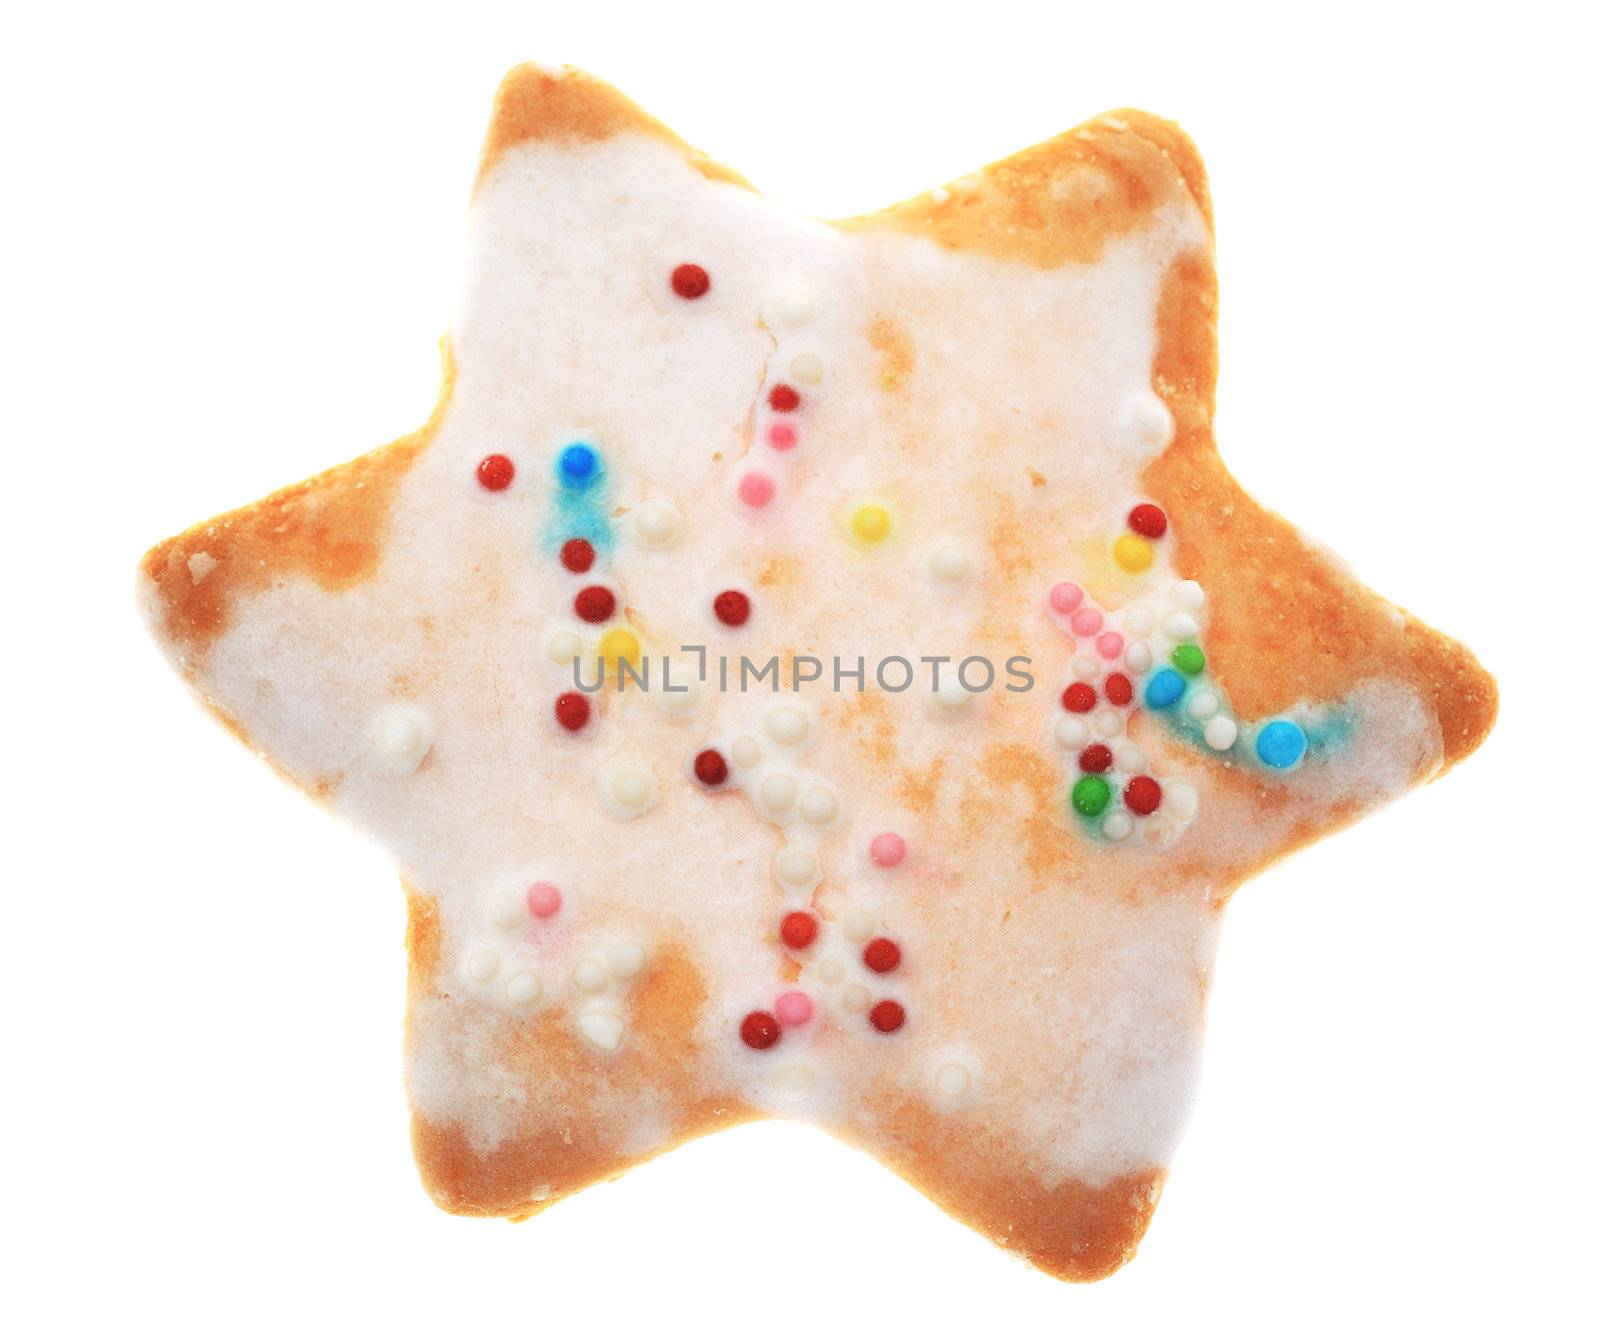 Star-shaped Cookie by RazvanPhotography